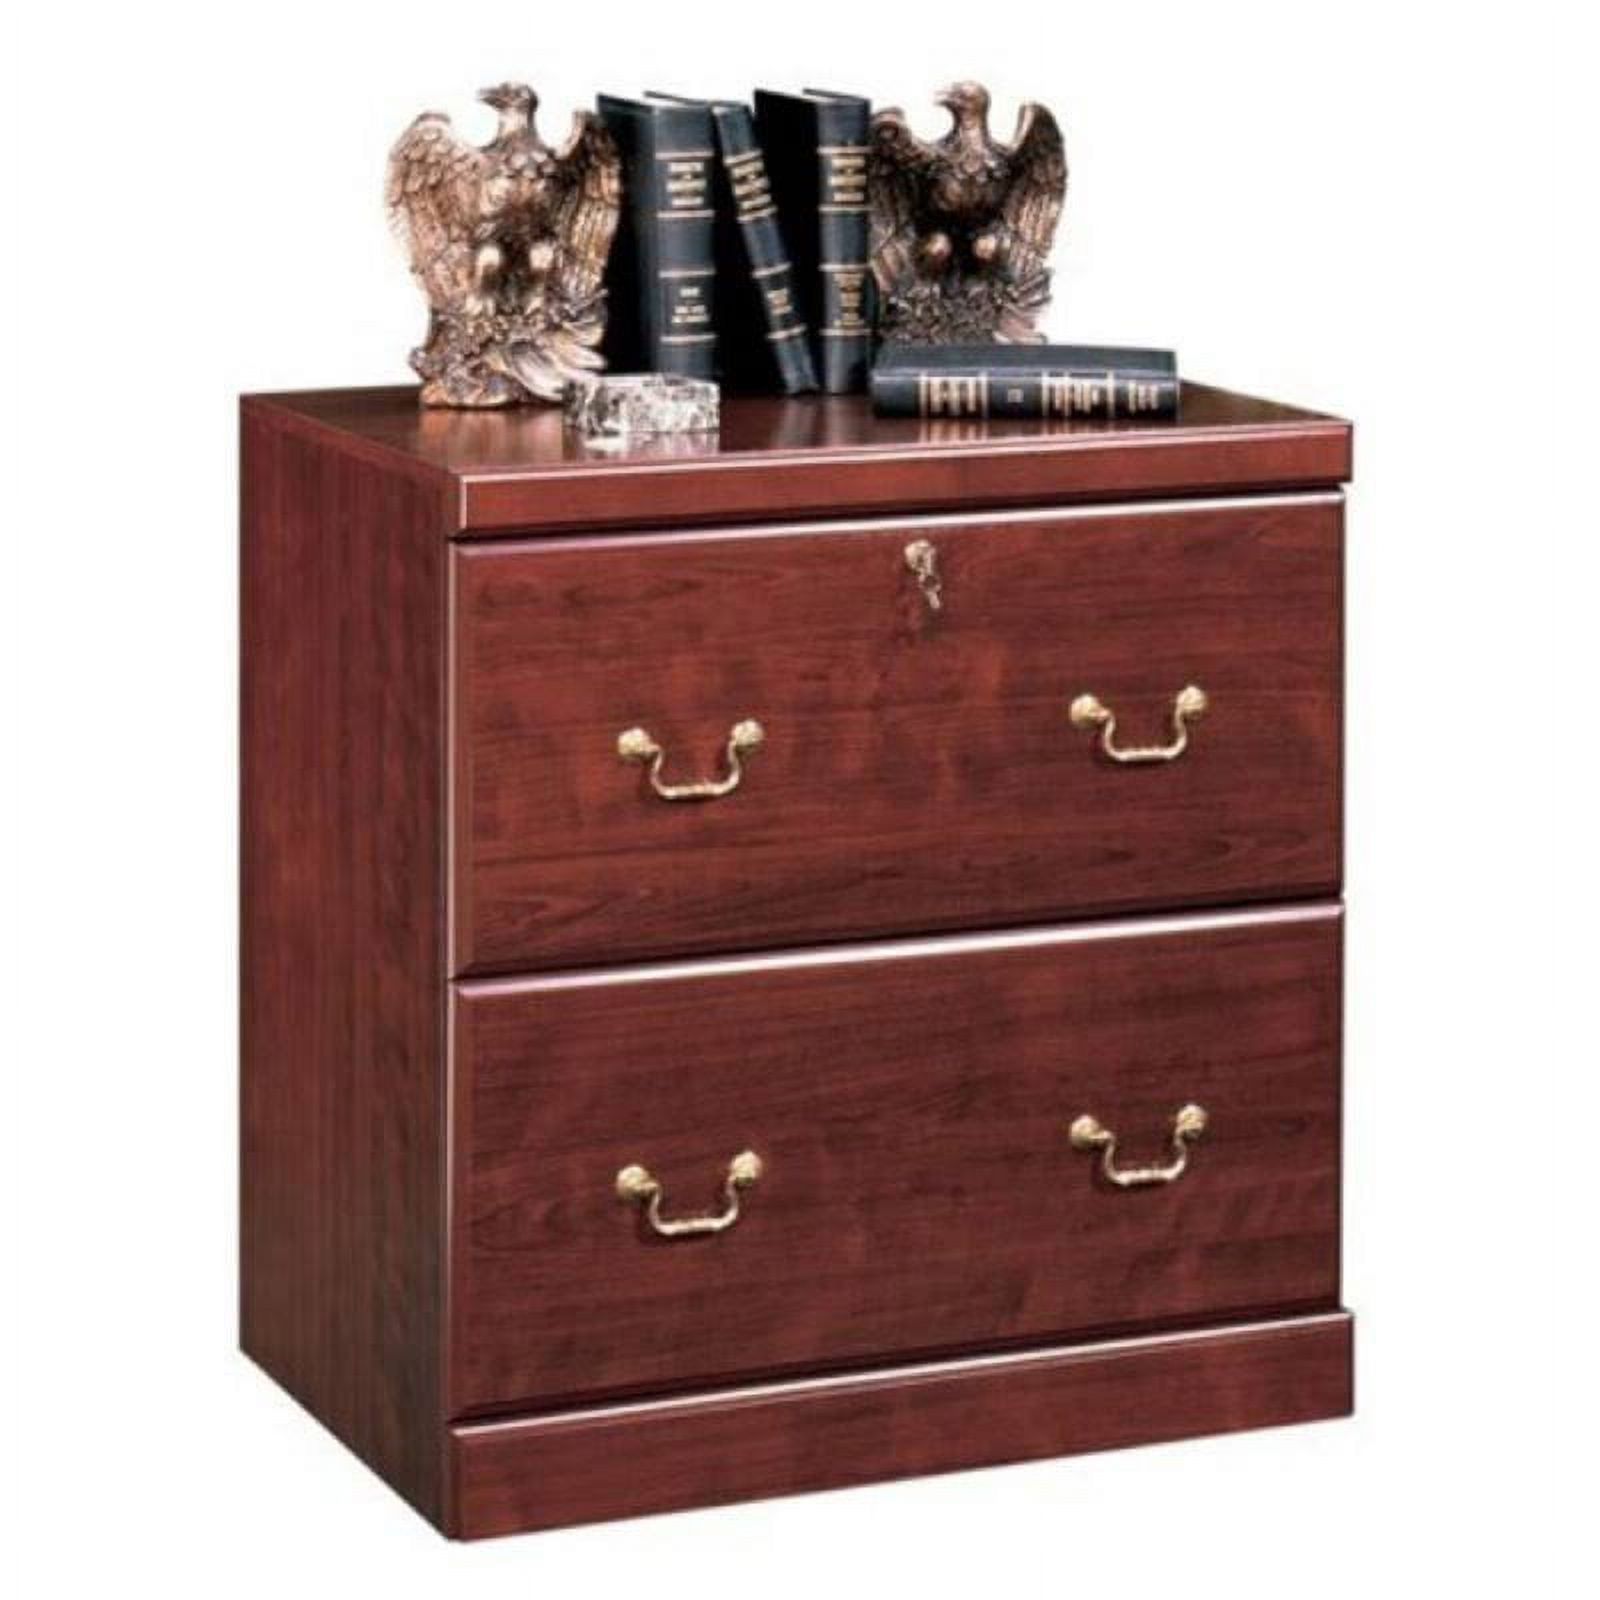 Bowery Hill 2 Drawer Lateral Wood File Cabinet in Classic Cherry - image 1 of 3